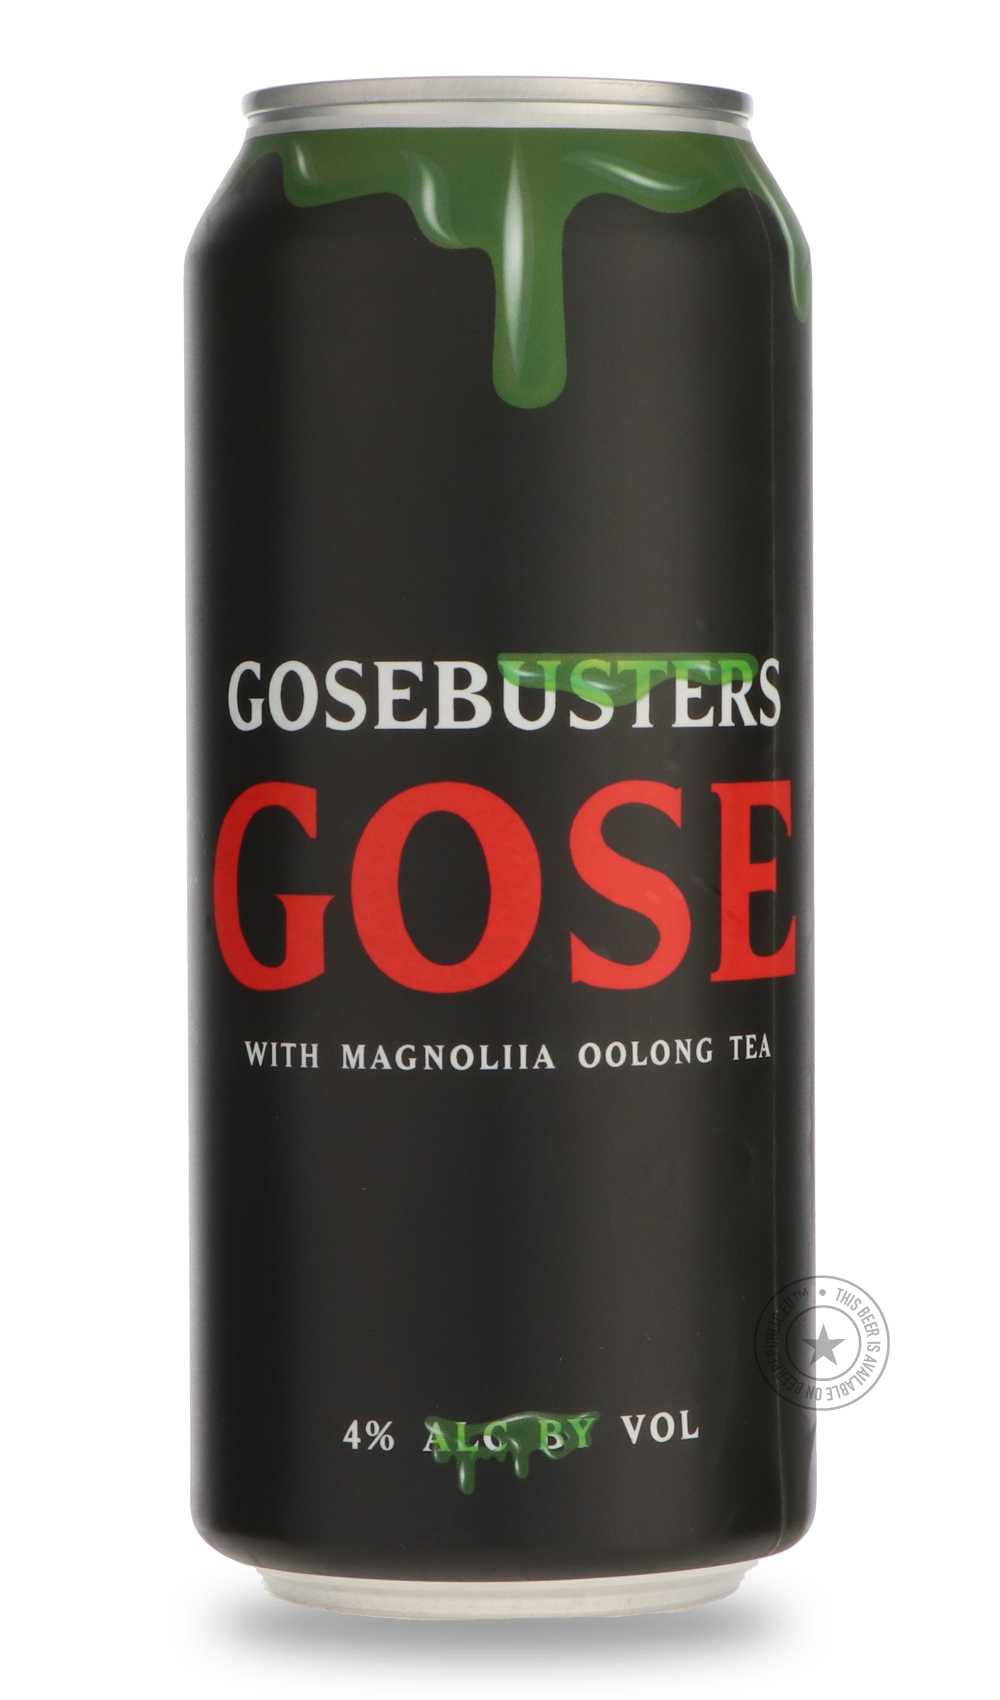 -Noble- Gosebusters-Sour / Wild & Fruity- Only @ Beer Republic - The best online beer store for American & Canadian craft beer - Buy beer online from the USA and Canada - Bier online kopen - Amerikaans bier kopen - Craft beer store - Craft beer kopen - Amerikanisch bier kaufen - Bier online kaufen - Acheter biere online - IPA - Stout - Porter - New England IPA - Hazy IPA - Imperial Stout - Barrel Aged - Barrel Aged Imperial Stout - Brown - Dark beer - Blond - Blonde - Pilsner - Lager - Wheat - Weizen - Ambe